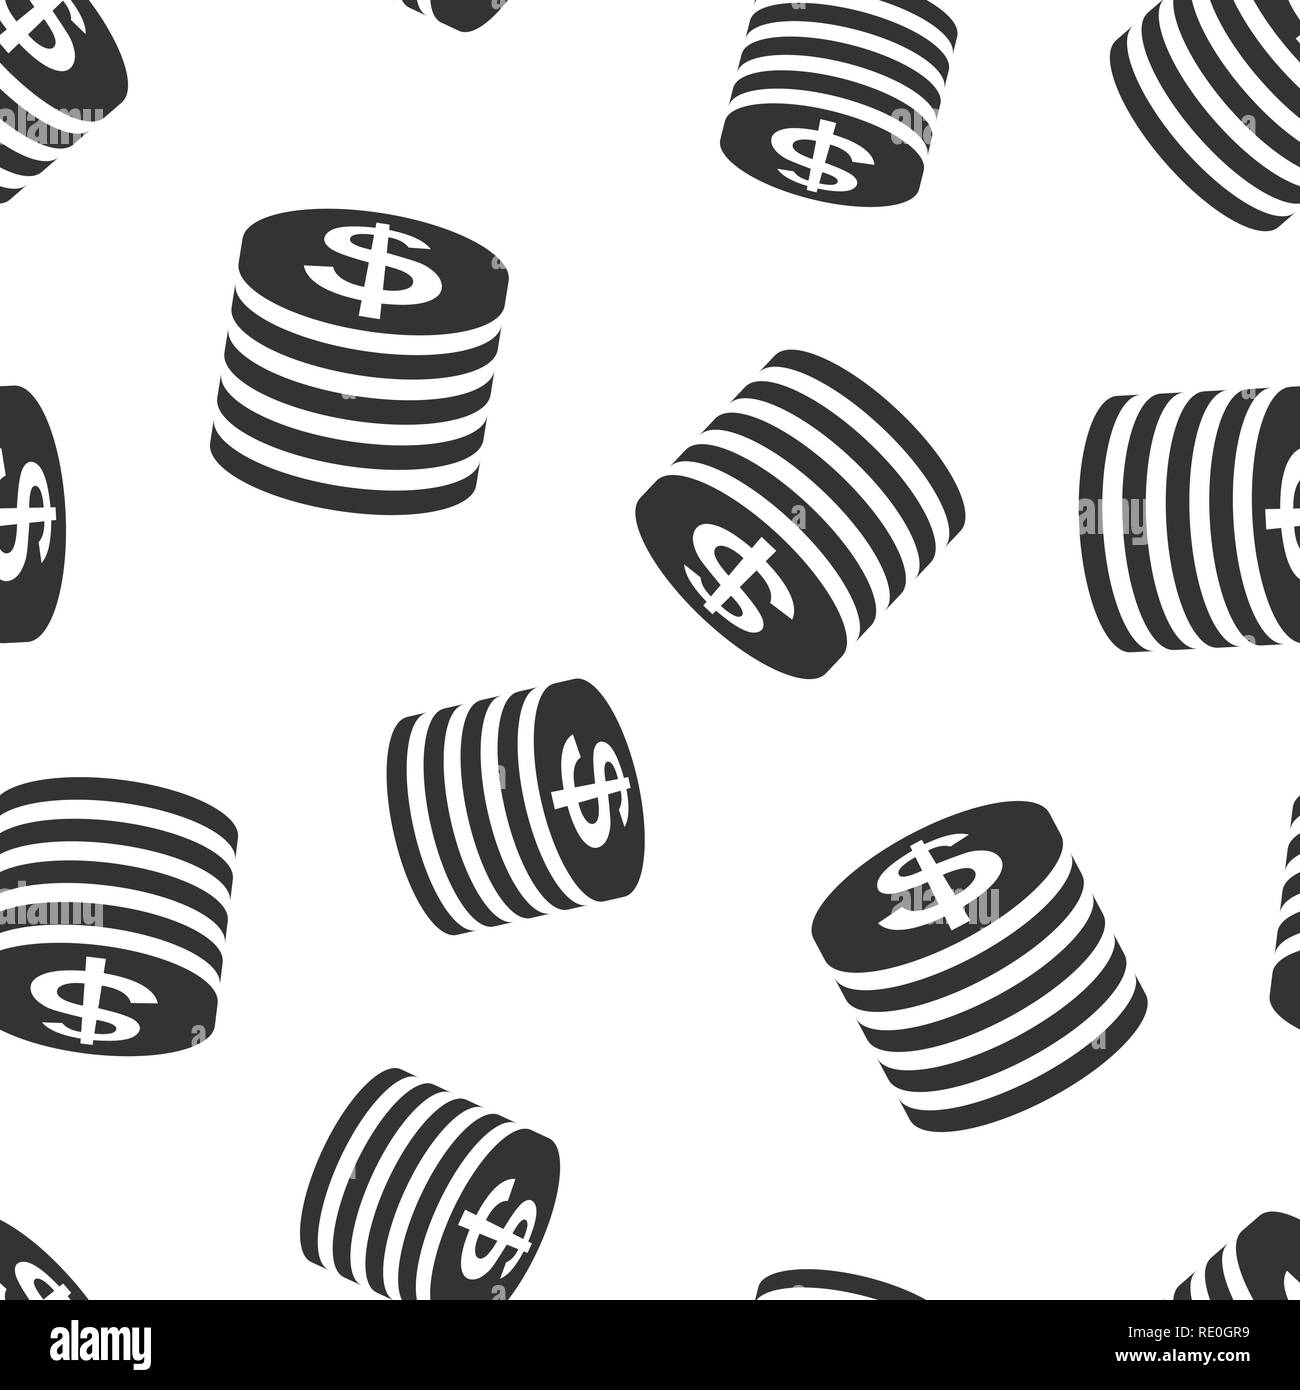 Coins stack icon seamless pattern background. Dollar coin vector illustration. Money stacked symbol pattern. Stock Vector